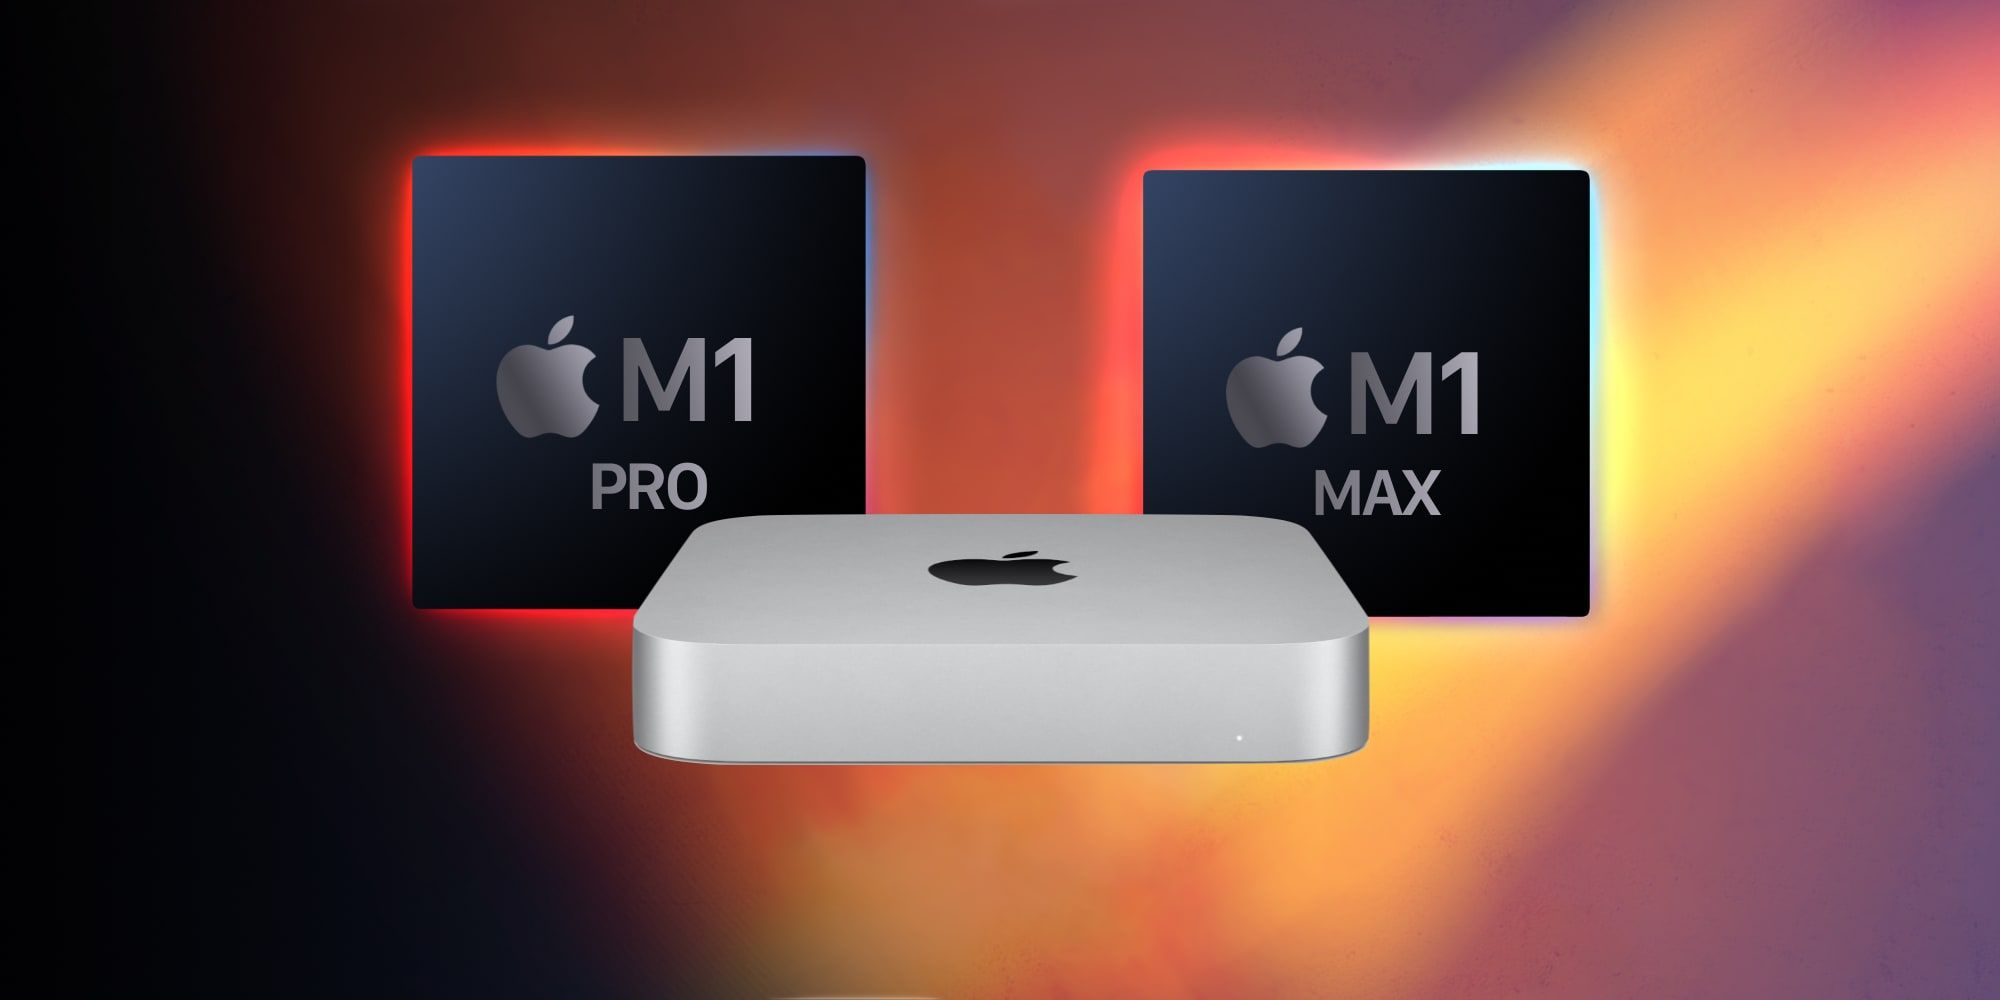 Apple Mac Mini With M1 Pro And Max Chips Behind